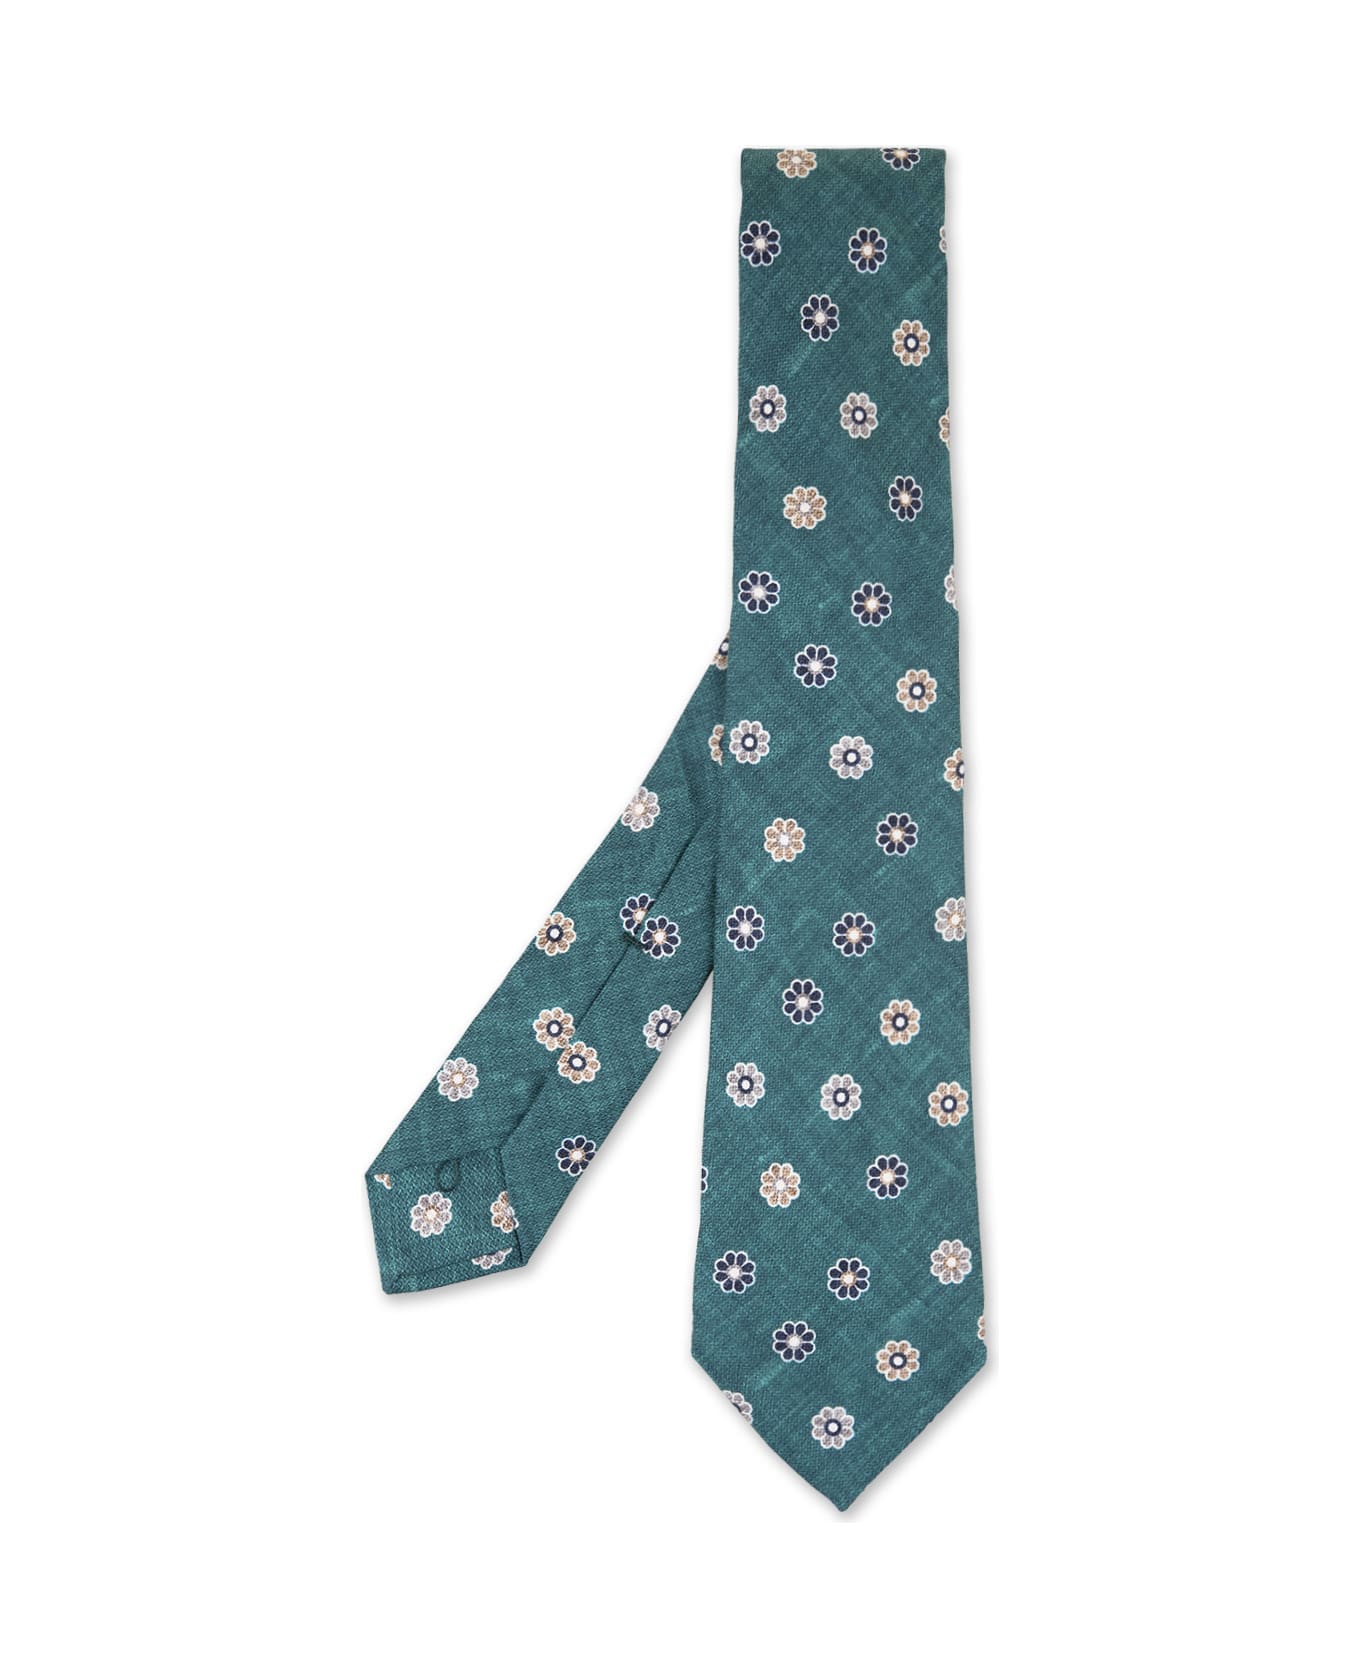 Kiton Green Tie With Flower Pattern - Green